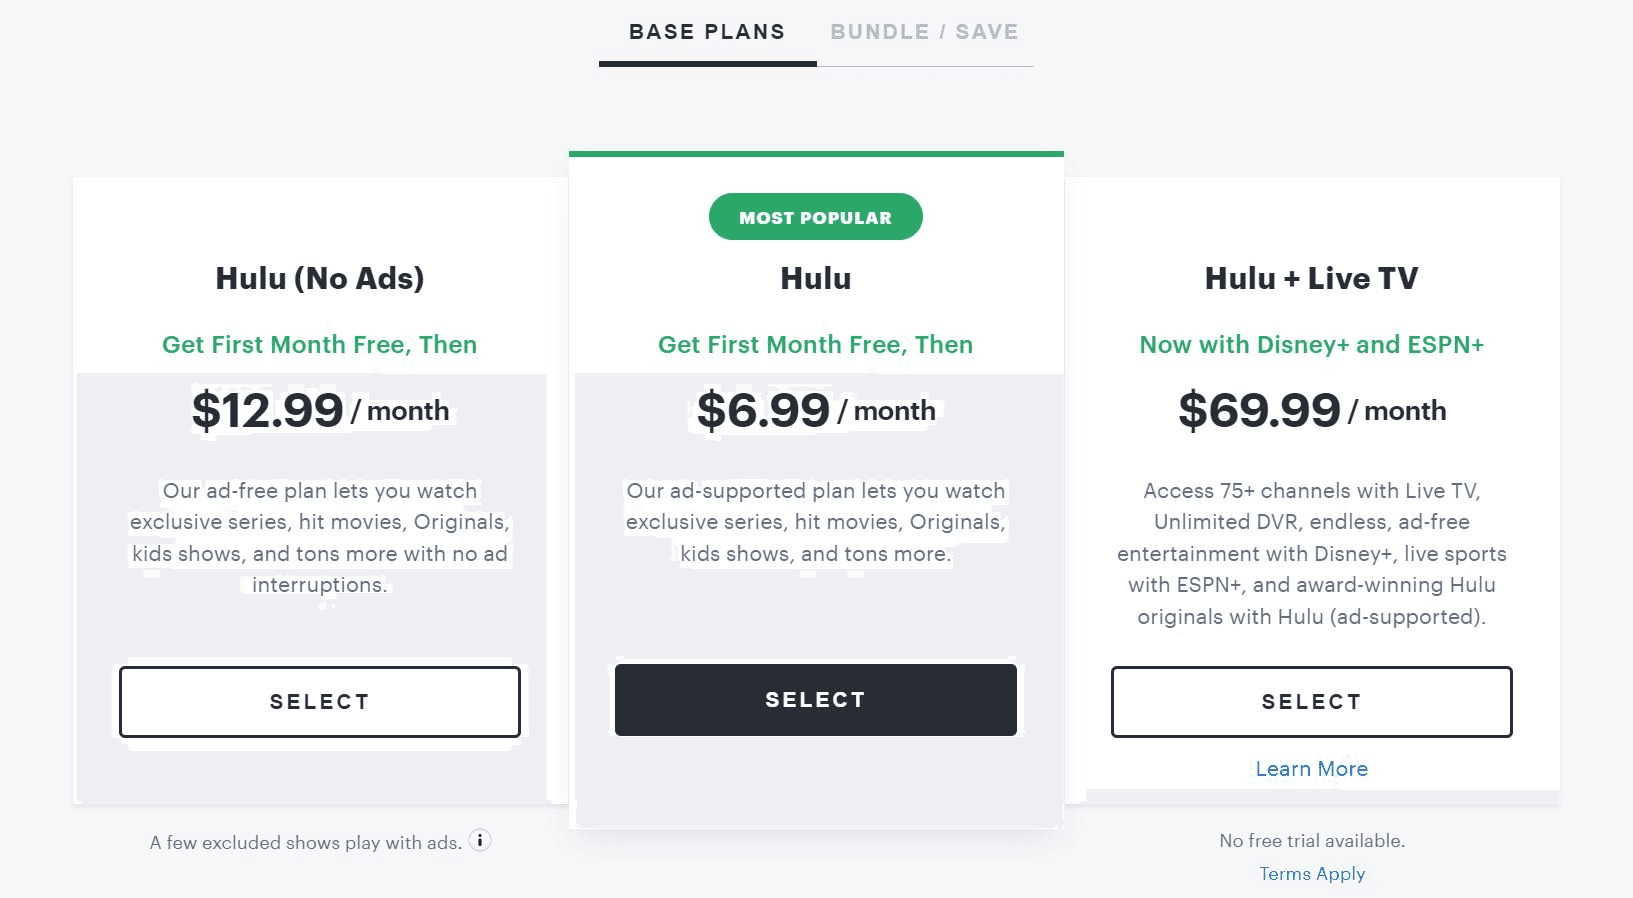 Hulu Basic plans and prices